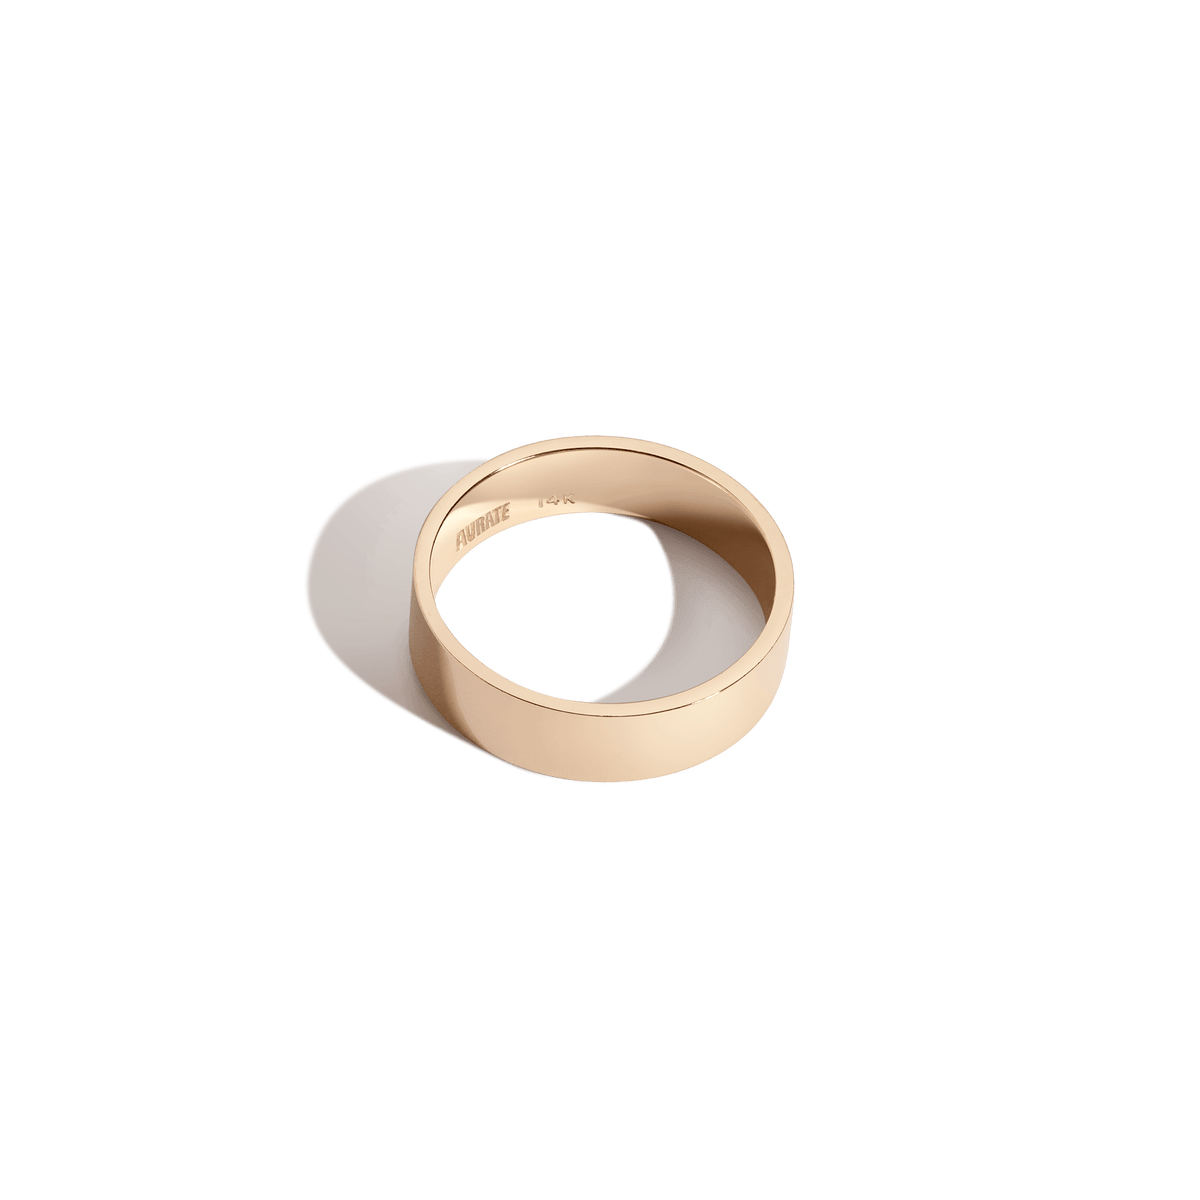 Resist Captivity Cigar Band Ring In 14ct Gold Vermeil With Garnet & White  Topaz, Self Published Jewellery